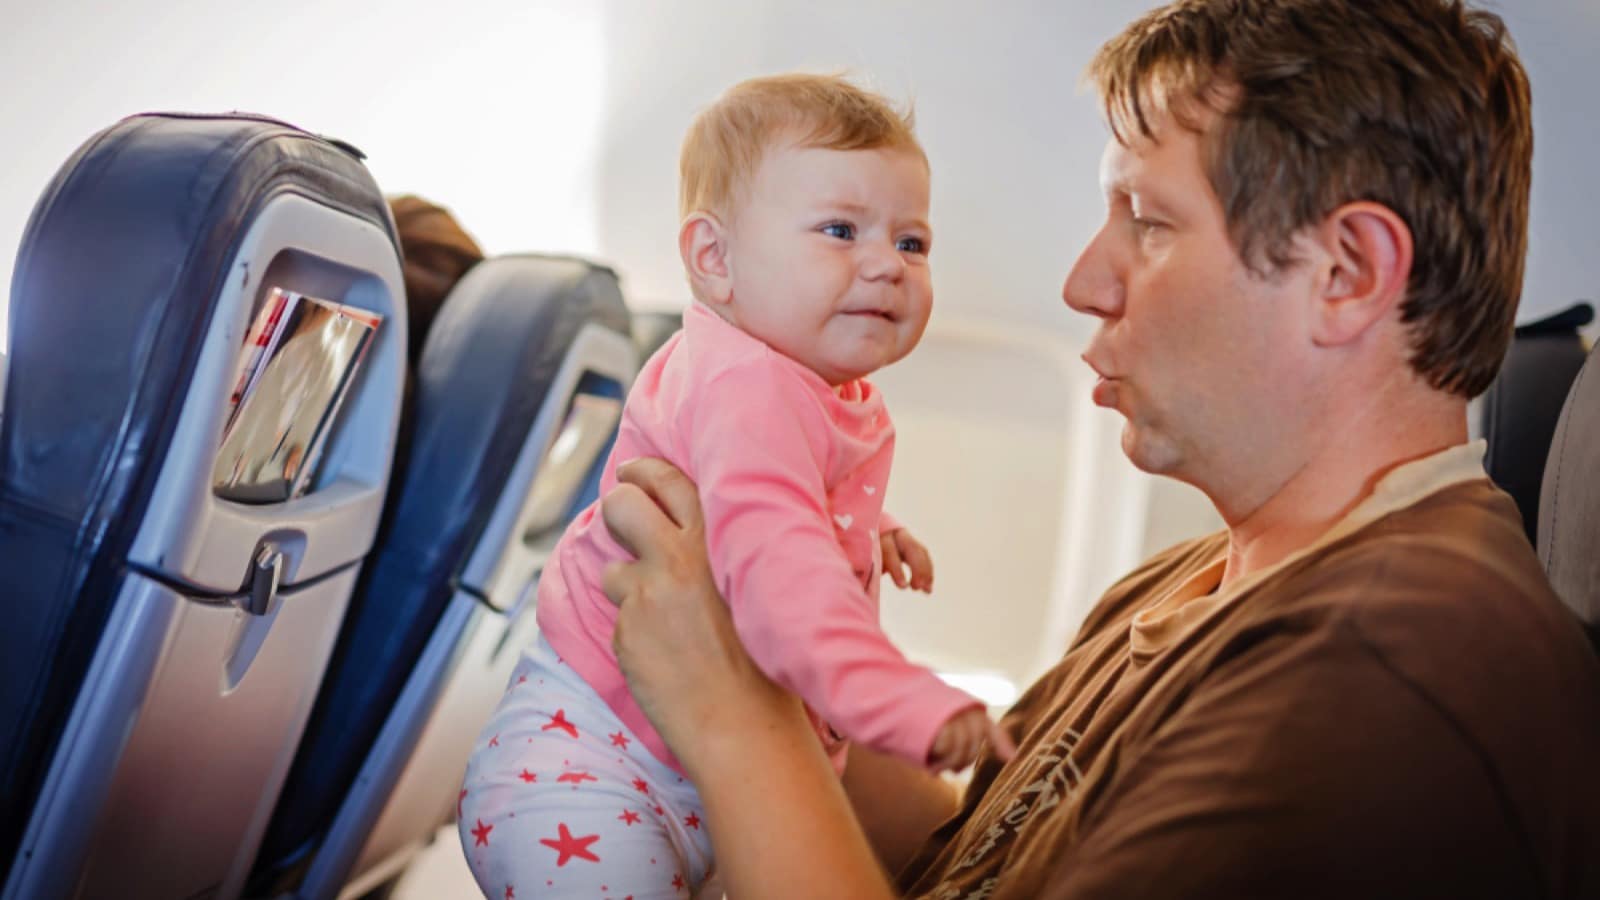 <p>Dual-parent flights should be done in shifts; one parent on, one parent off. It may not be fun for the parent on baby duty, but it's best for all parties involved. Someone has to "be aware and make smart decisions when traveling internationally with a family." On the return flight home, the parents alternate responsibilities.</p>